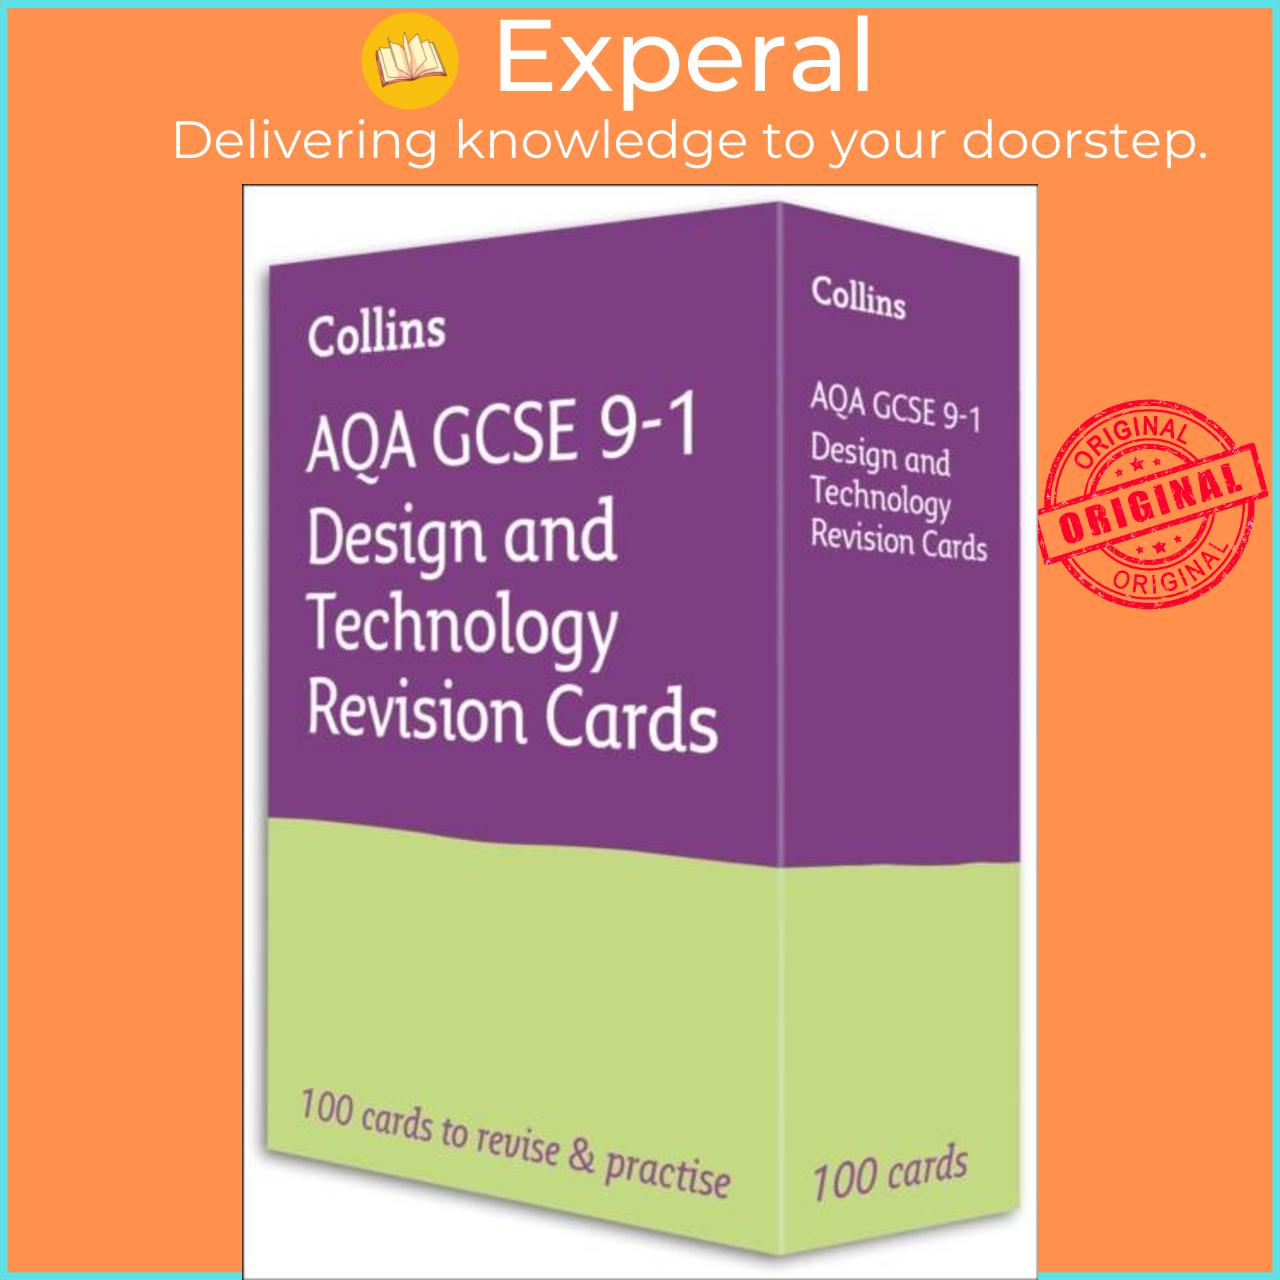 Sách - AQA GCSE 9-1 Design & Technology Revision Cards - Ideal for Home Learning by Collins GCSE (UK edition, paperback)